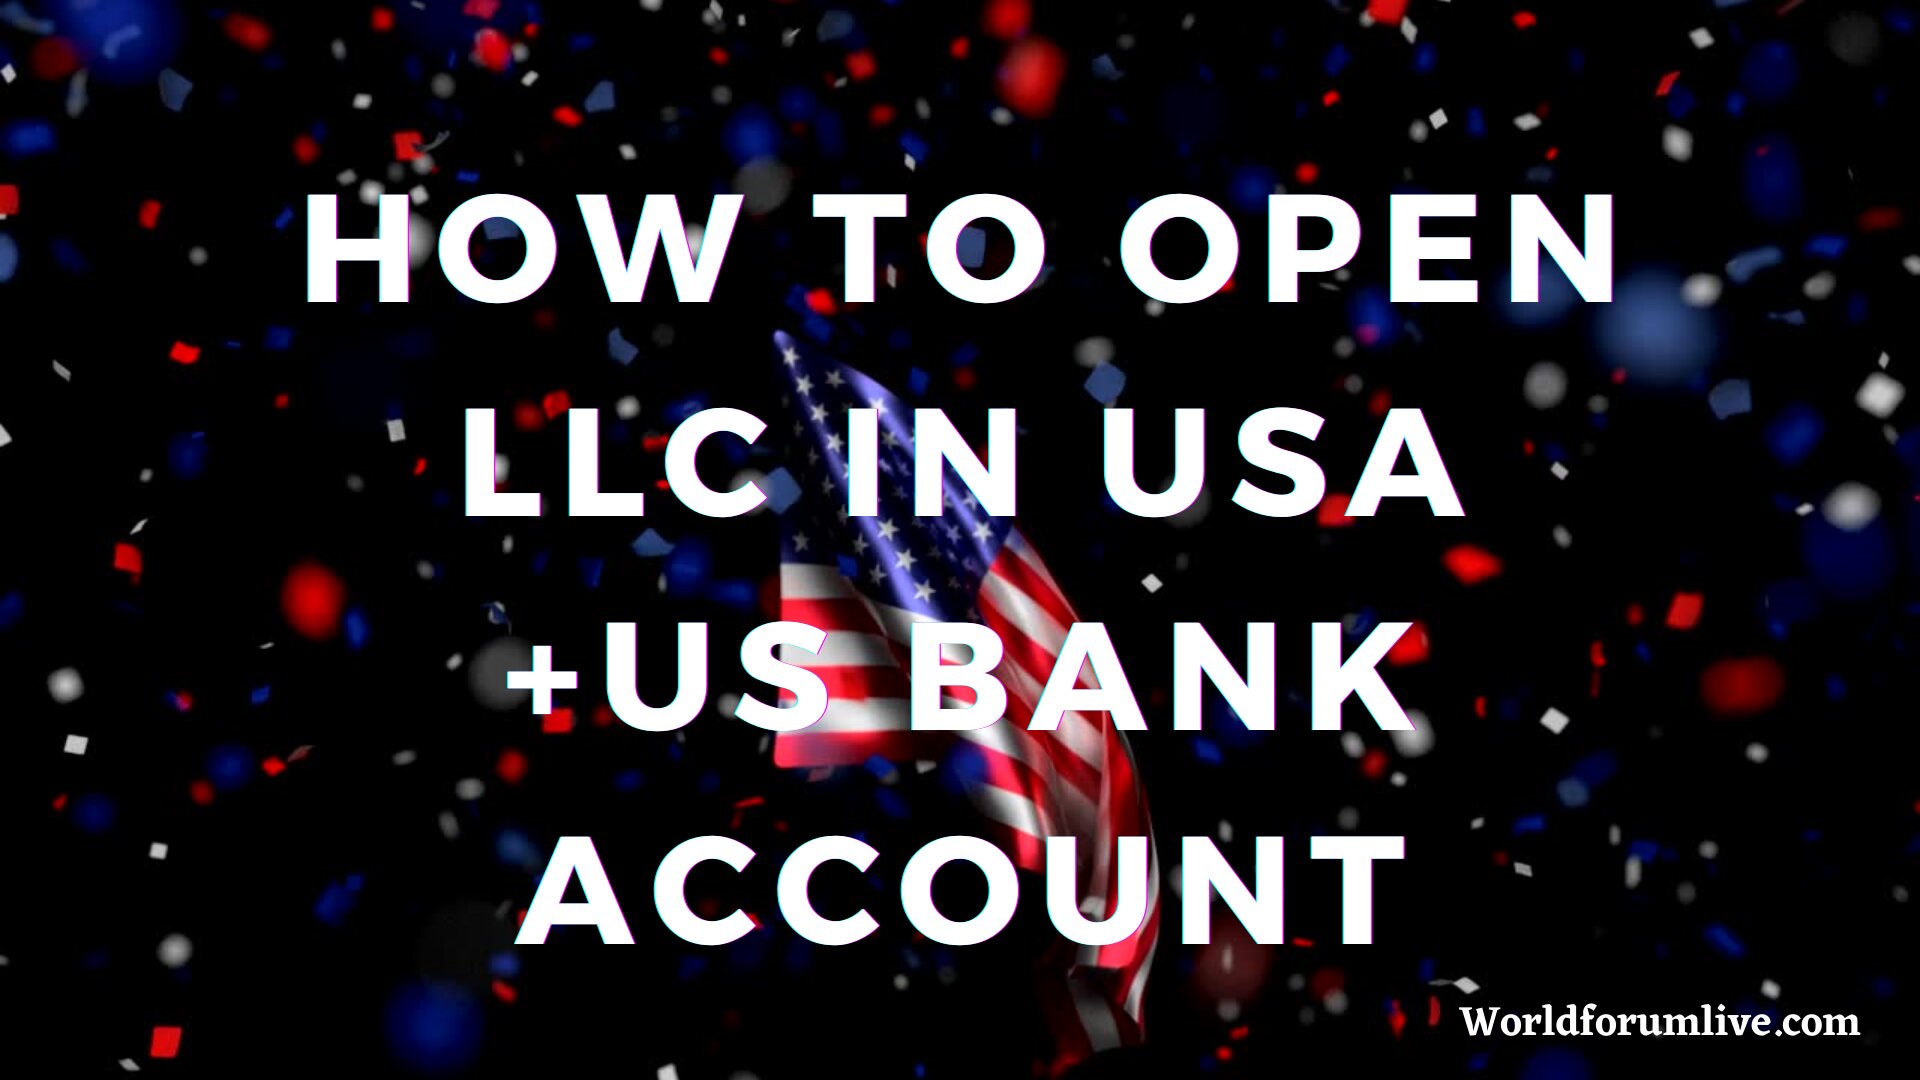 Step By Step How To Set Up An LLC In USA For Non-Residents And US Bank worldforumlive.jpg